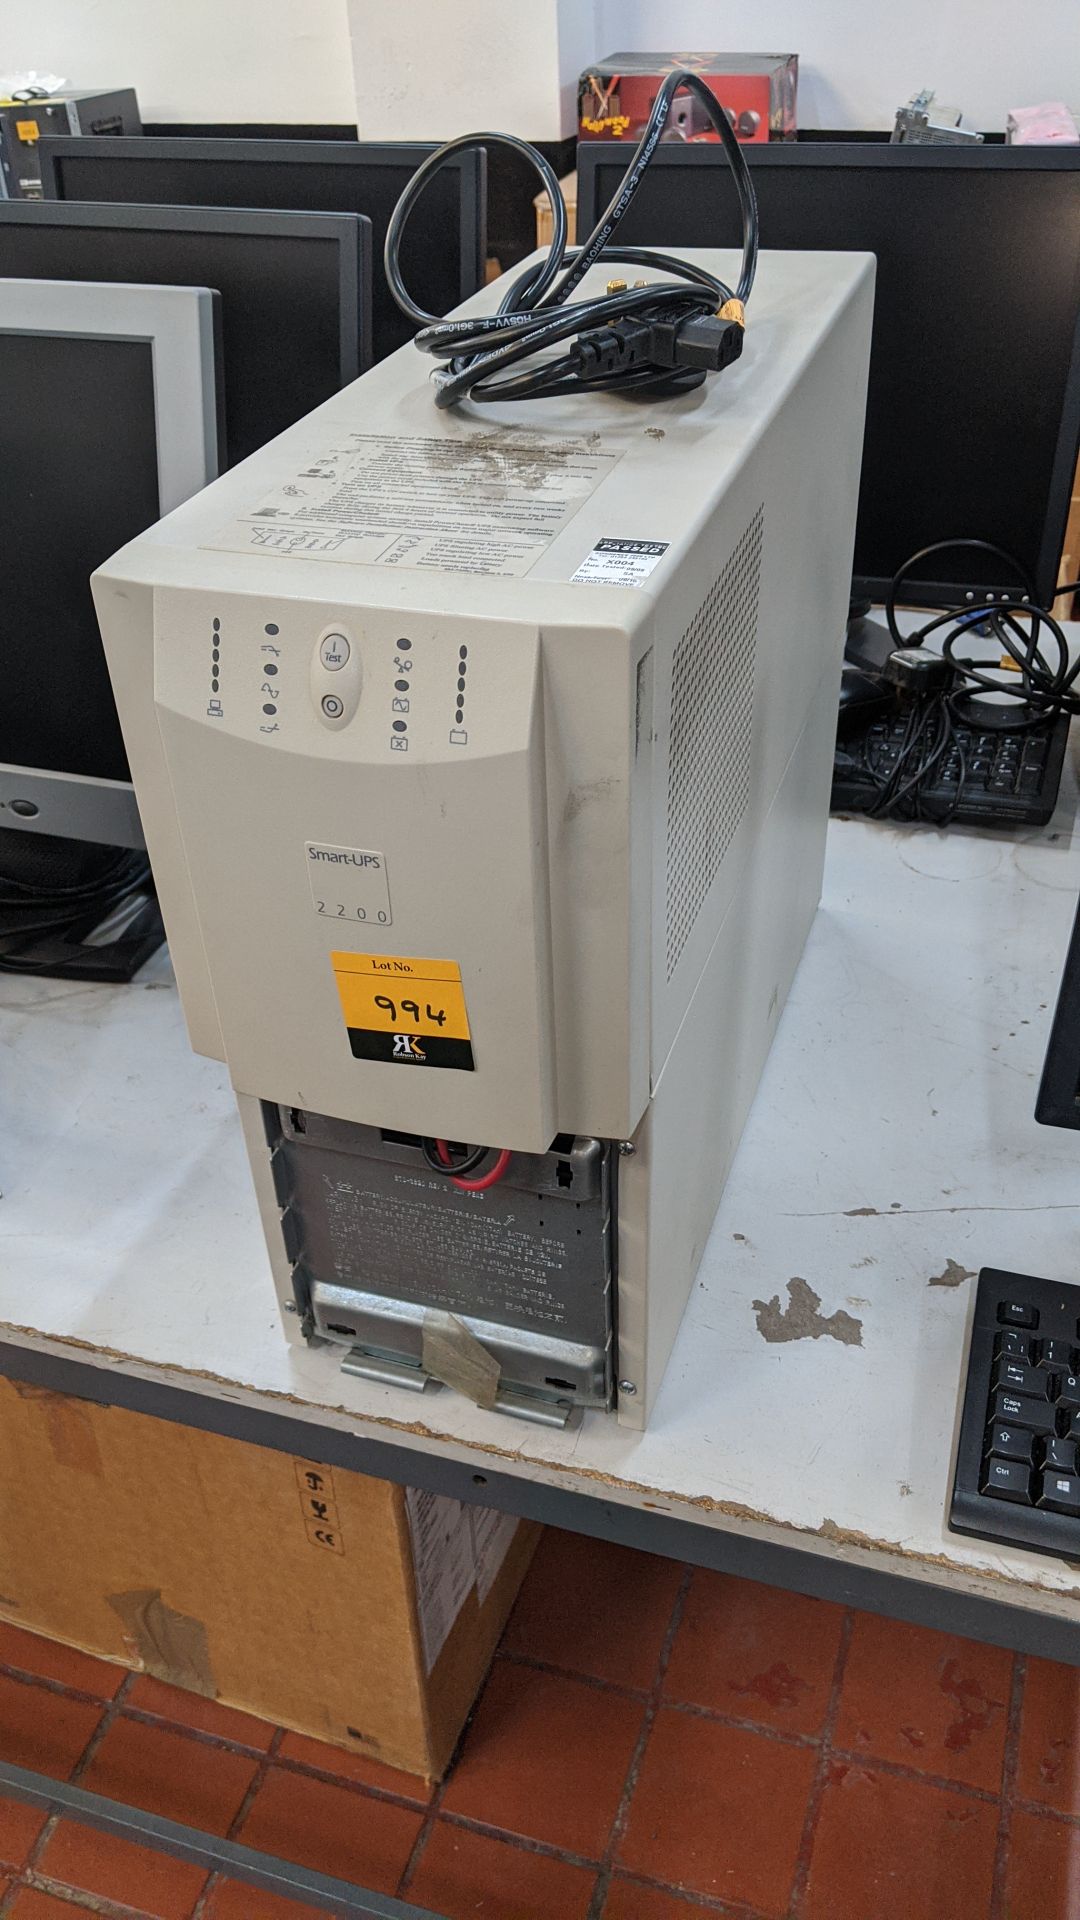 APC Smart-UPS 2200 - missing what appears to be a cosmetic panel. This is one of a large number of